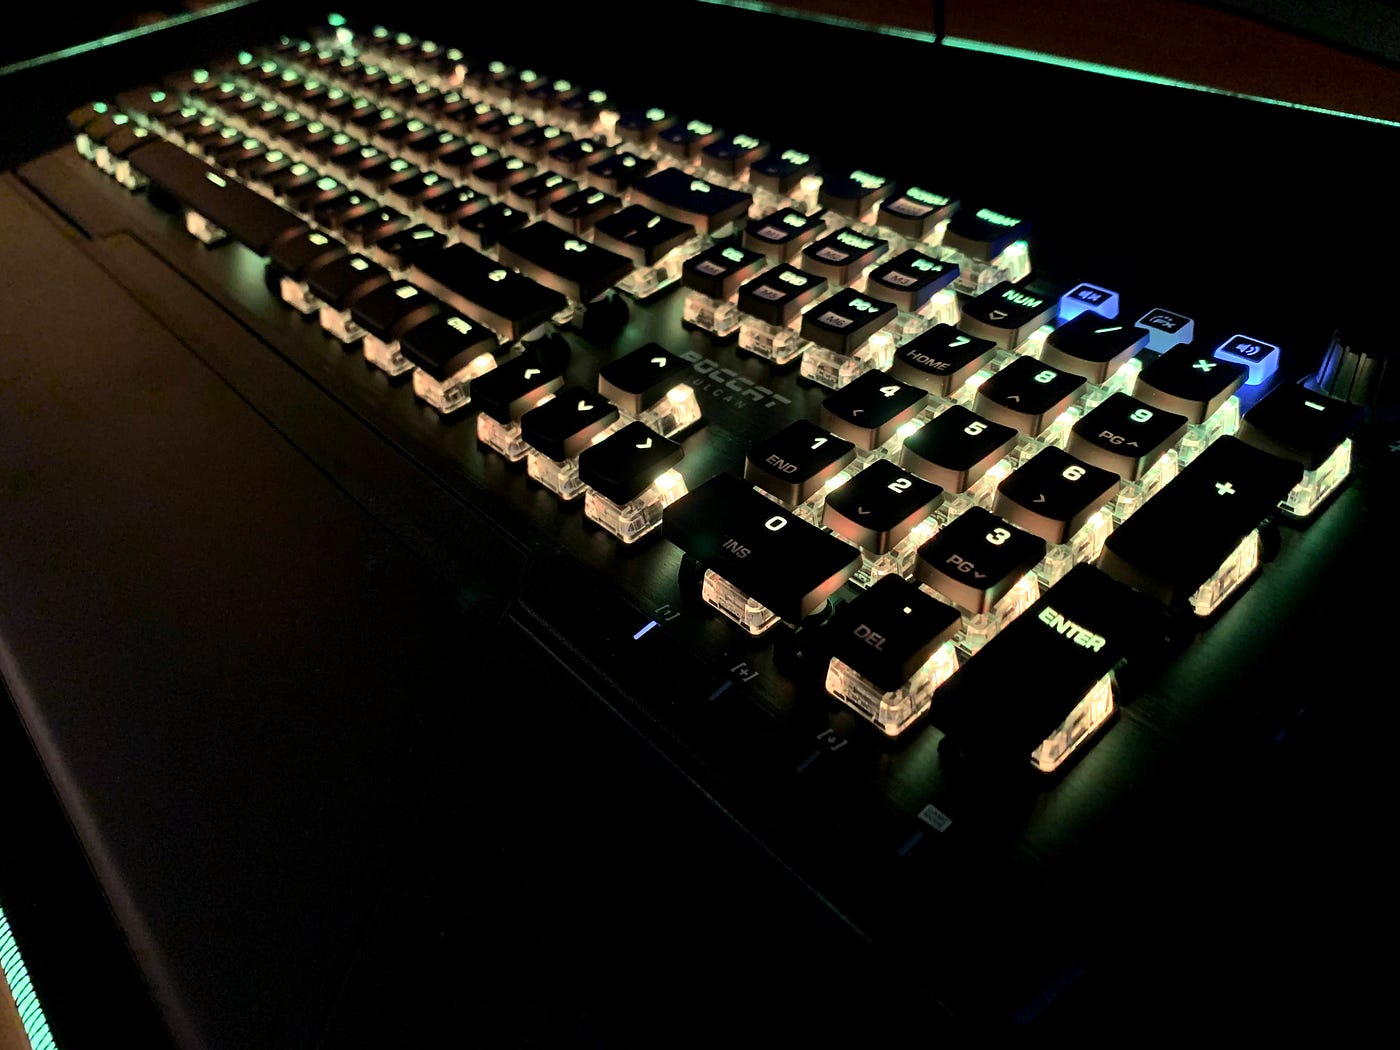 Roccat Vulcan Pro gaming keyboard uses optical switch that's 40x